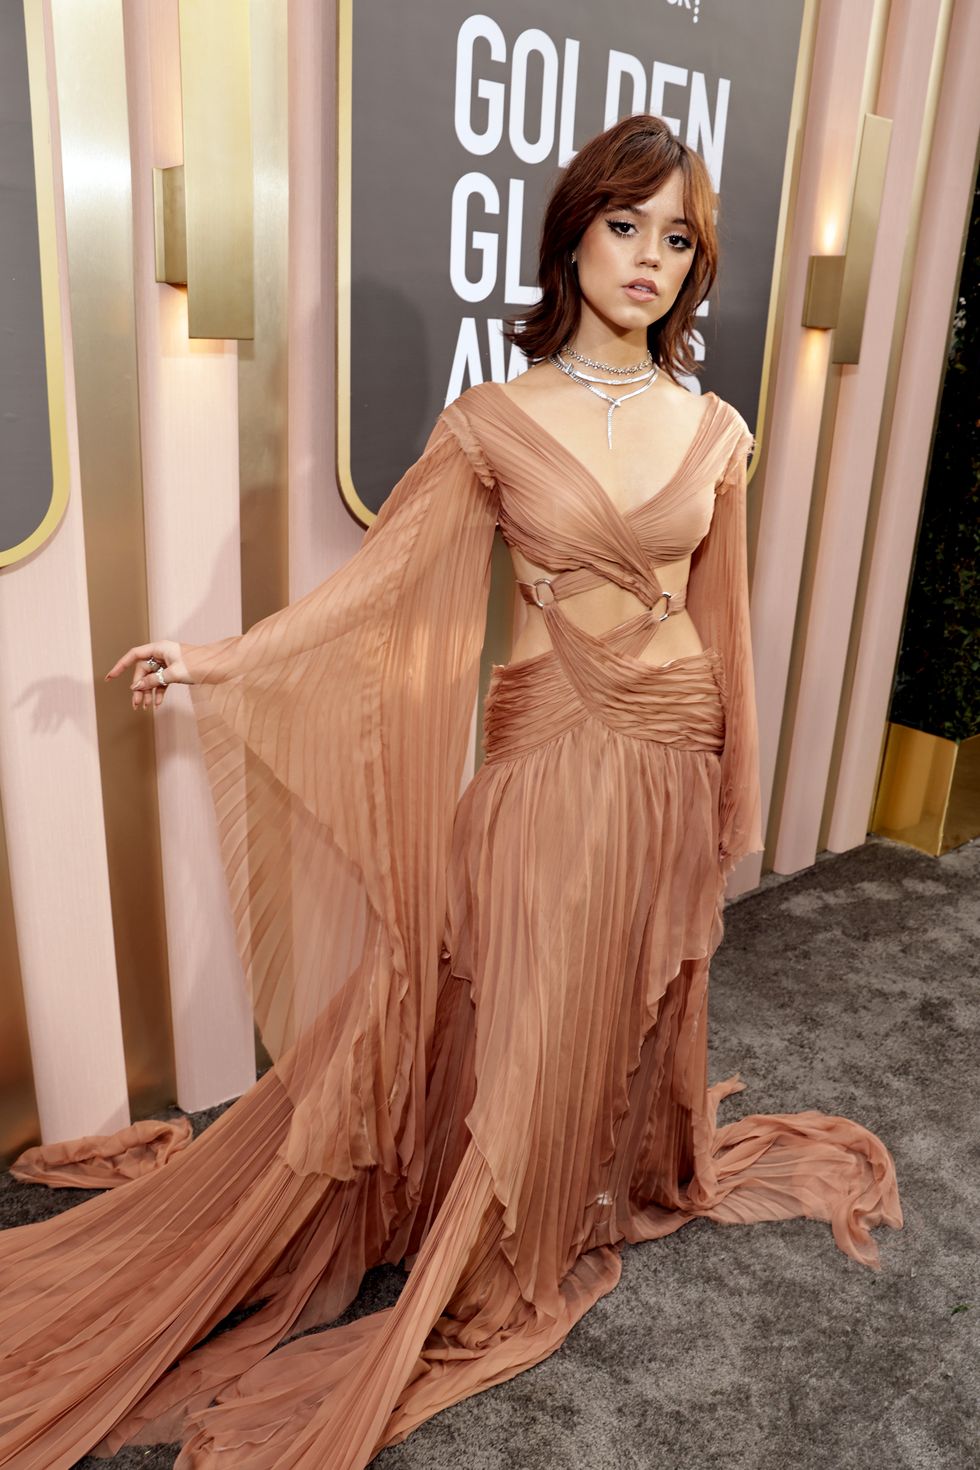 beverly hills, california january 10 80th annual golden globe awards pictured jenna ortega arrives at the 80th annual golden globe awards held at the beverly hilton hotel on january 10, 2023 in beverly hills, california photo by todd williamsonnbcnbc via getty images